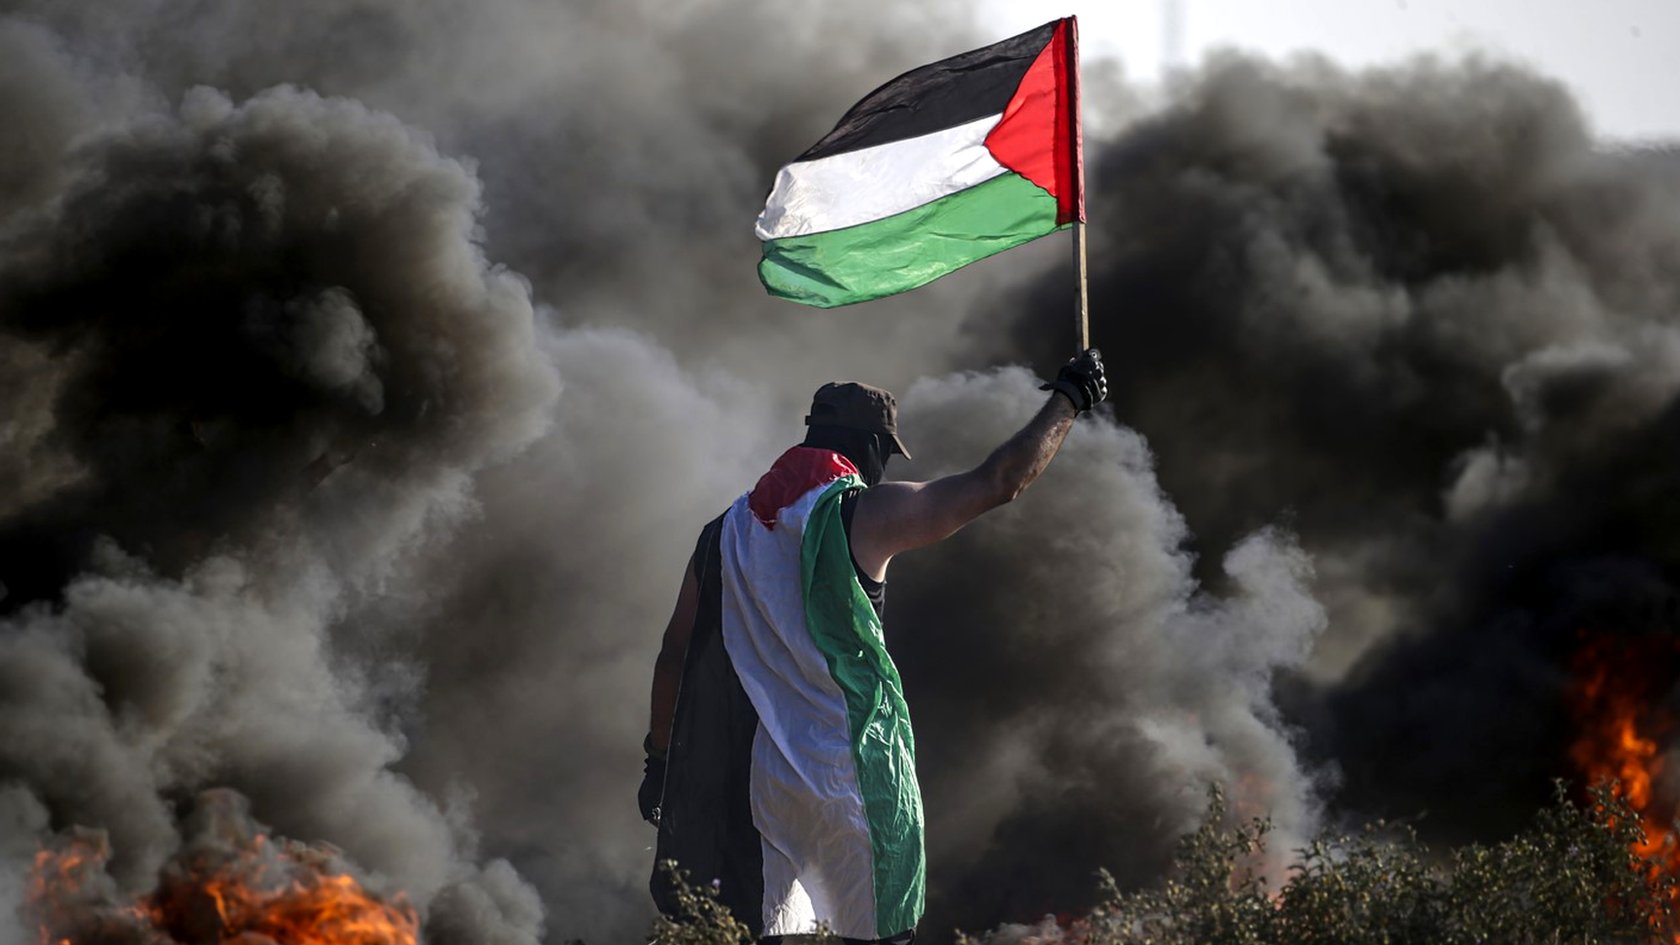 Gaza-Israel tensions spiral amid closures and clashes